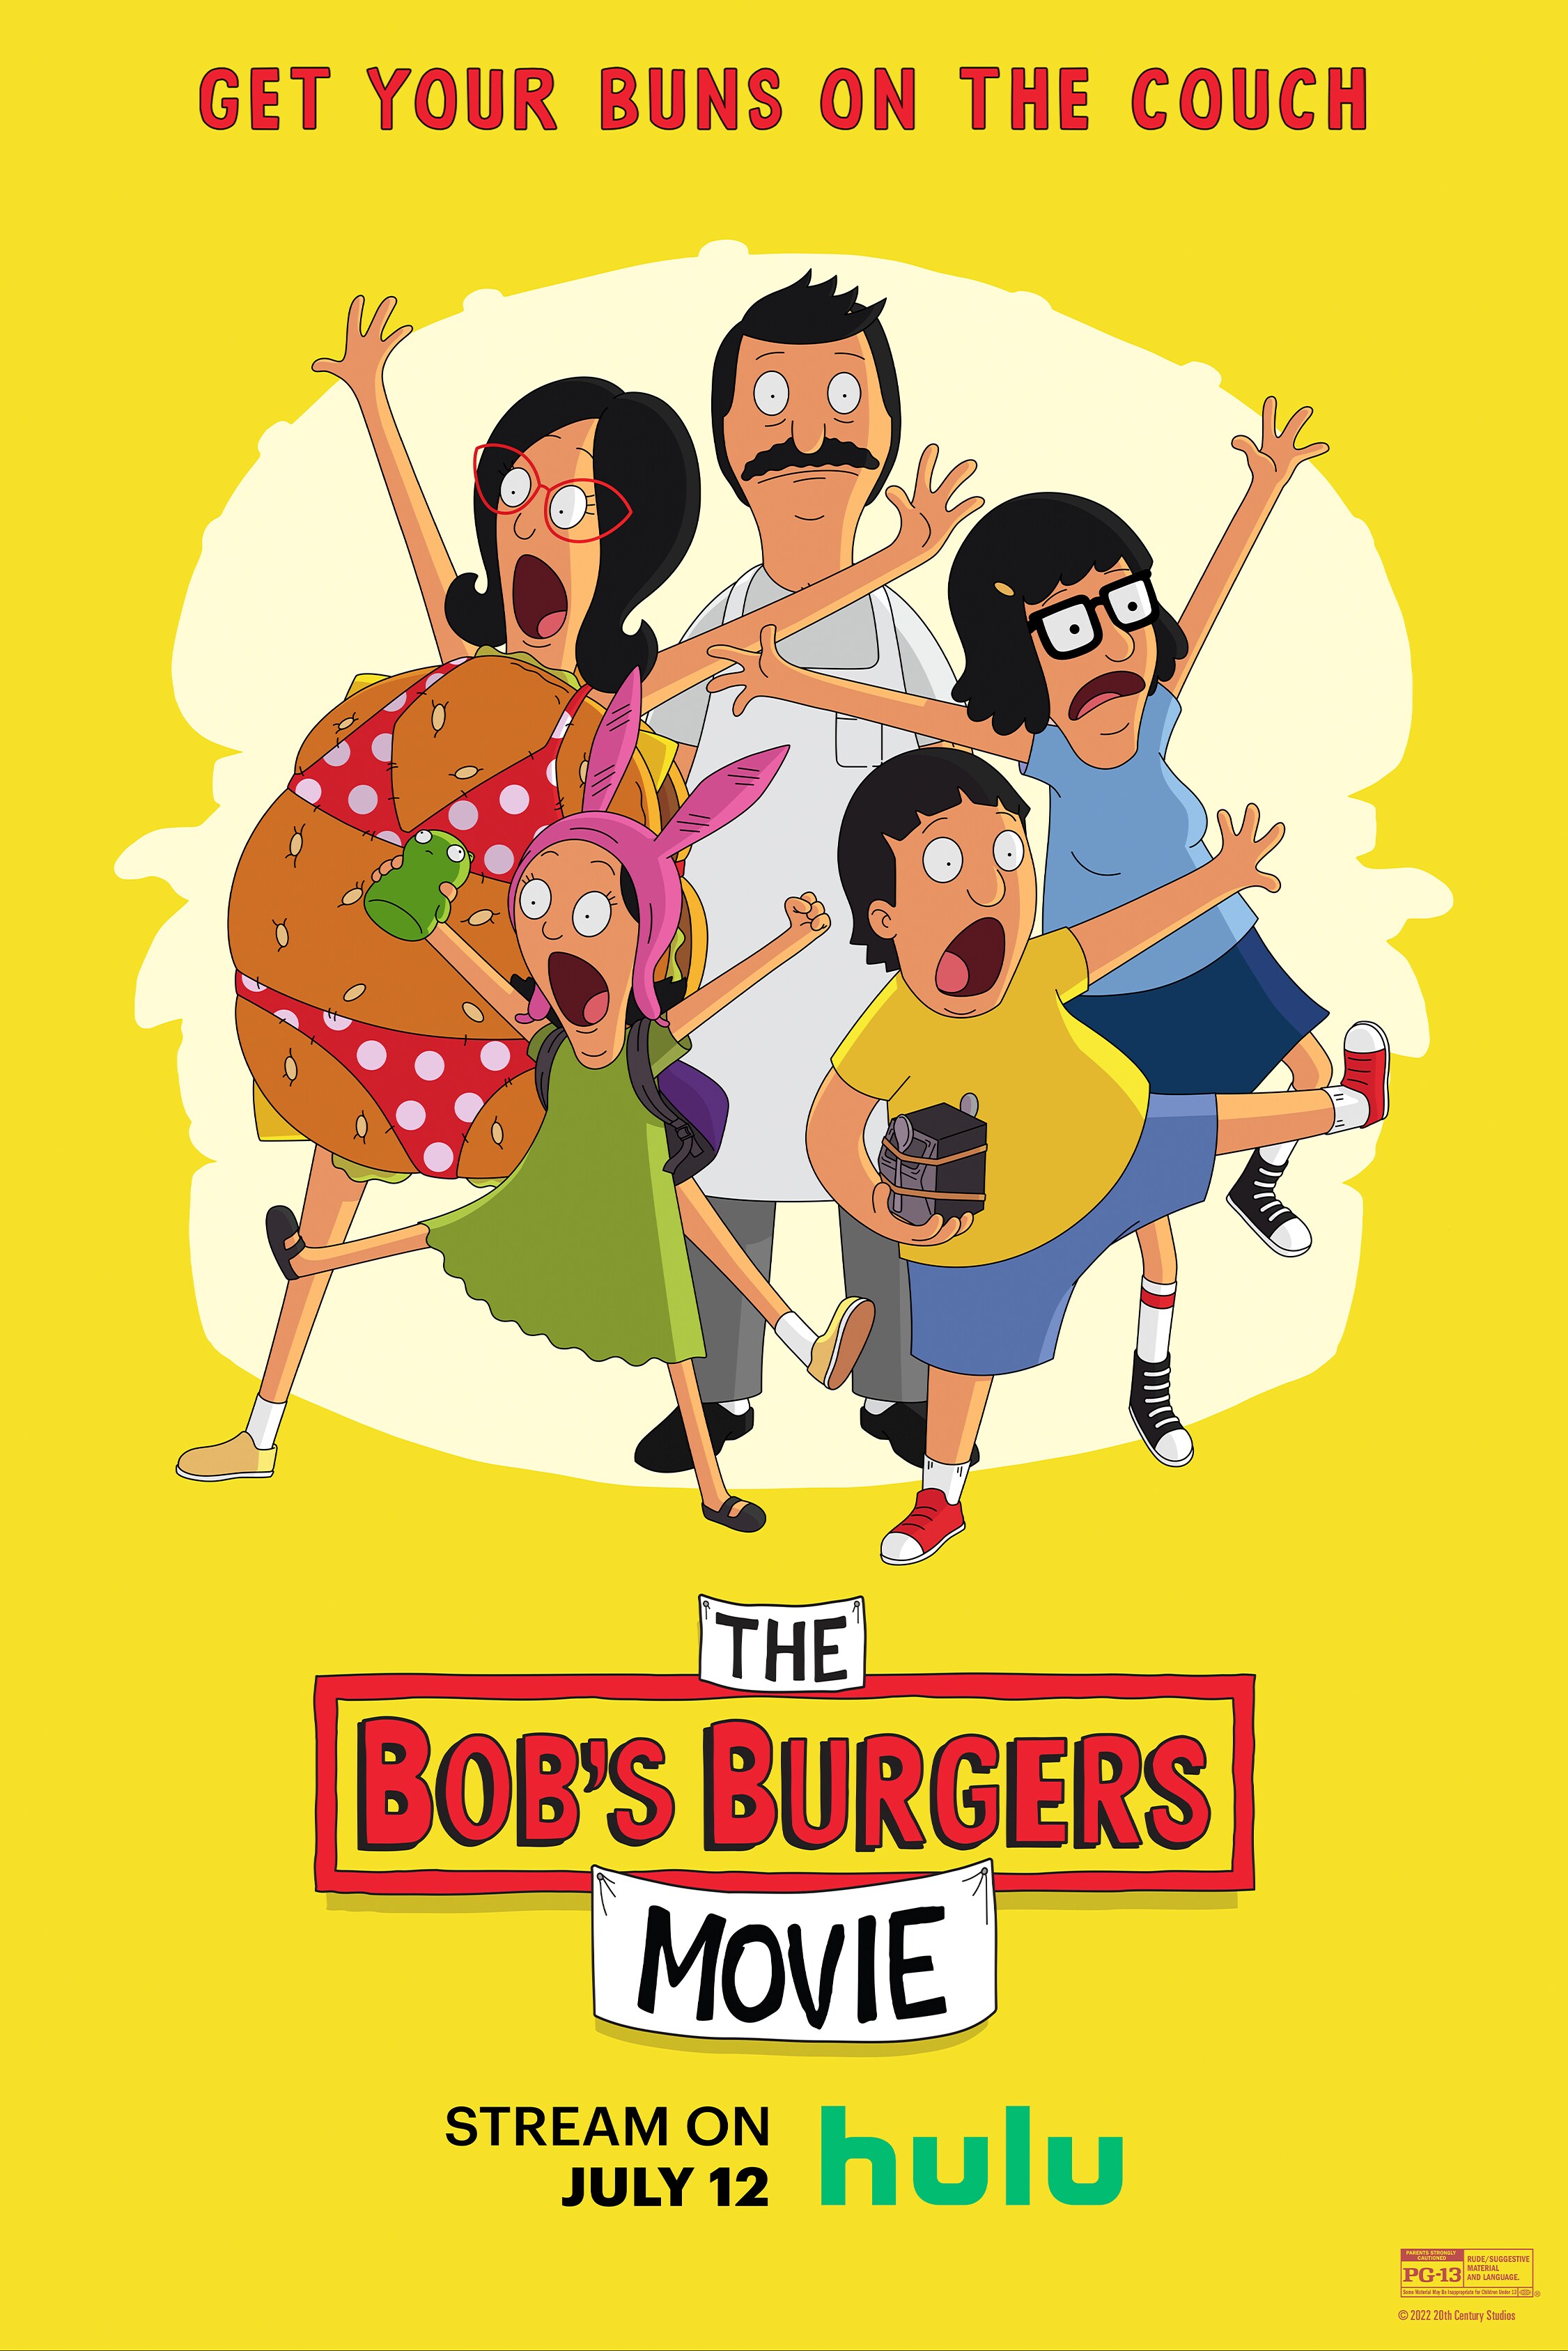 Get your buns on the couch | The Bob's Burgers Movie | Stream on Hulu July 12 | movie poster